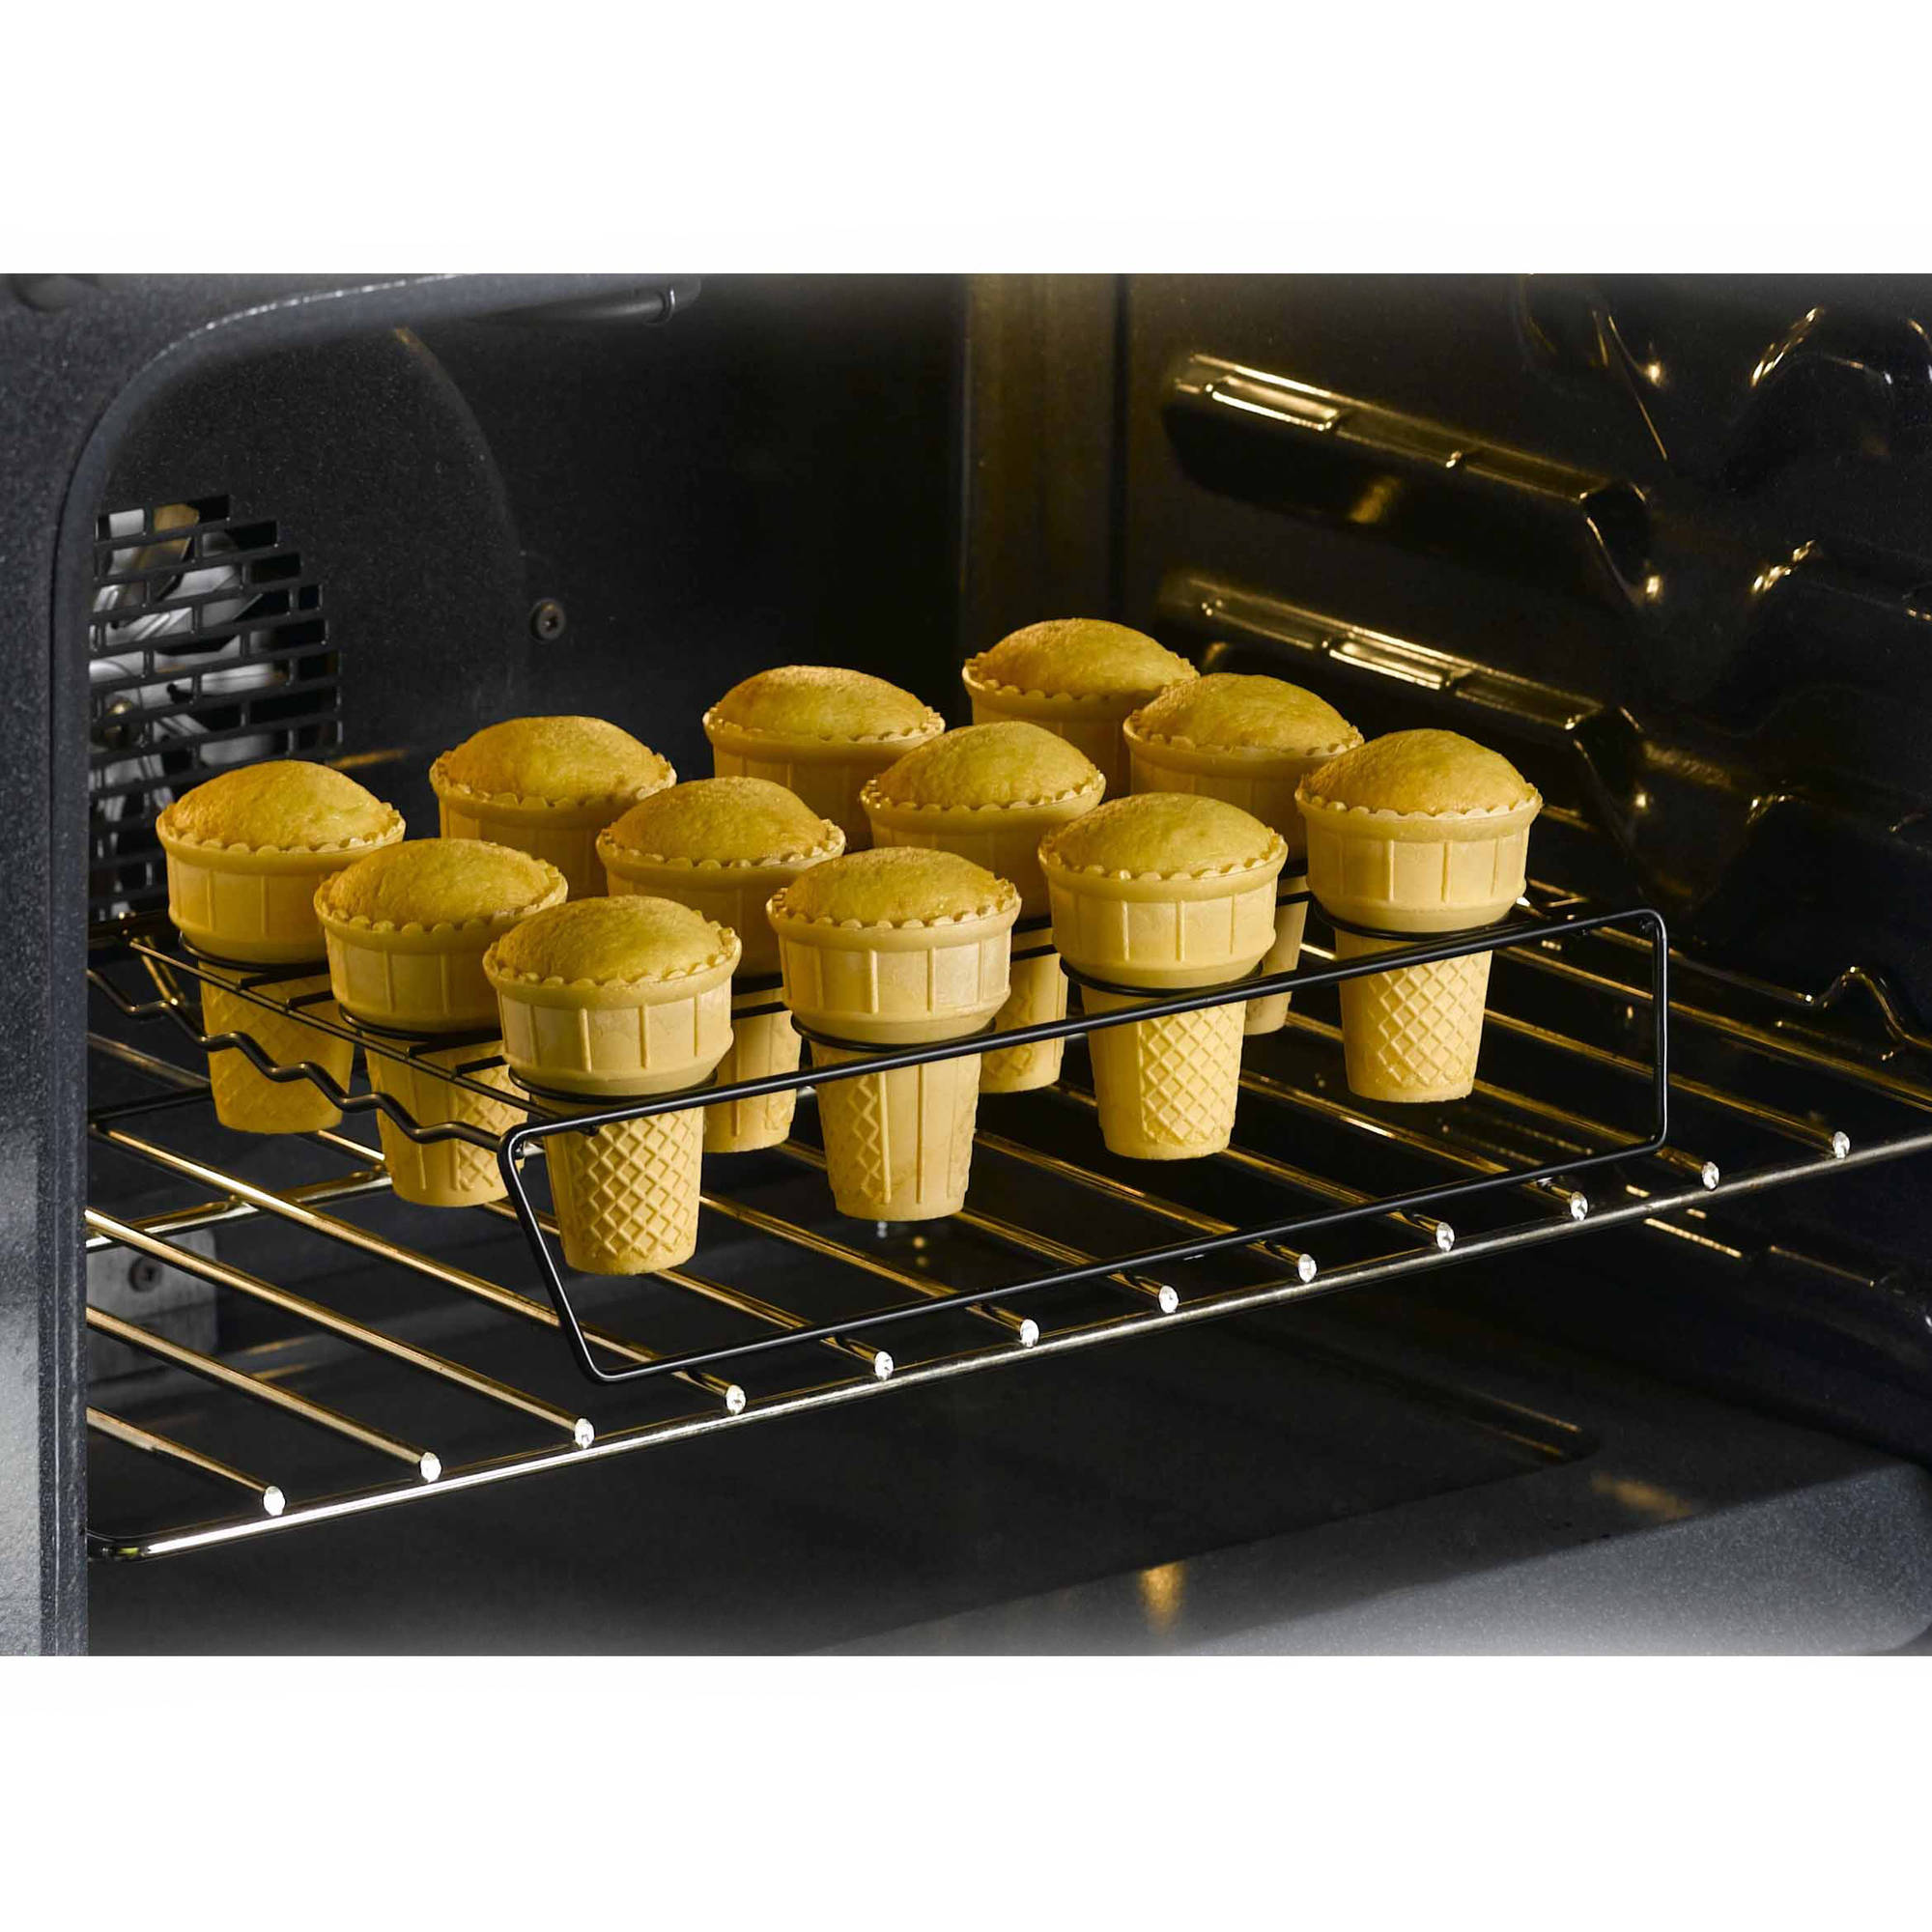 Nifty Solutions Ice Cream Cone Cupcake Baking Rack – Holds up to 12 Medium & Large Cupcake Cones, Non-Stick, Black - image 2 of 9